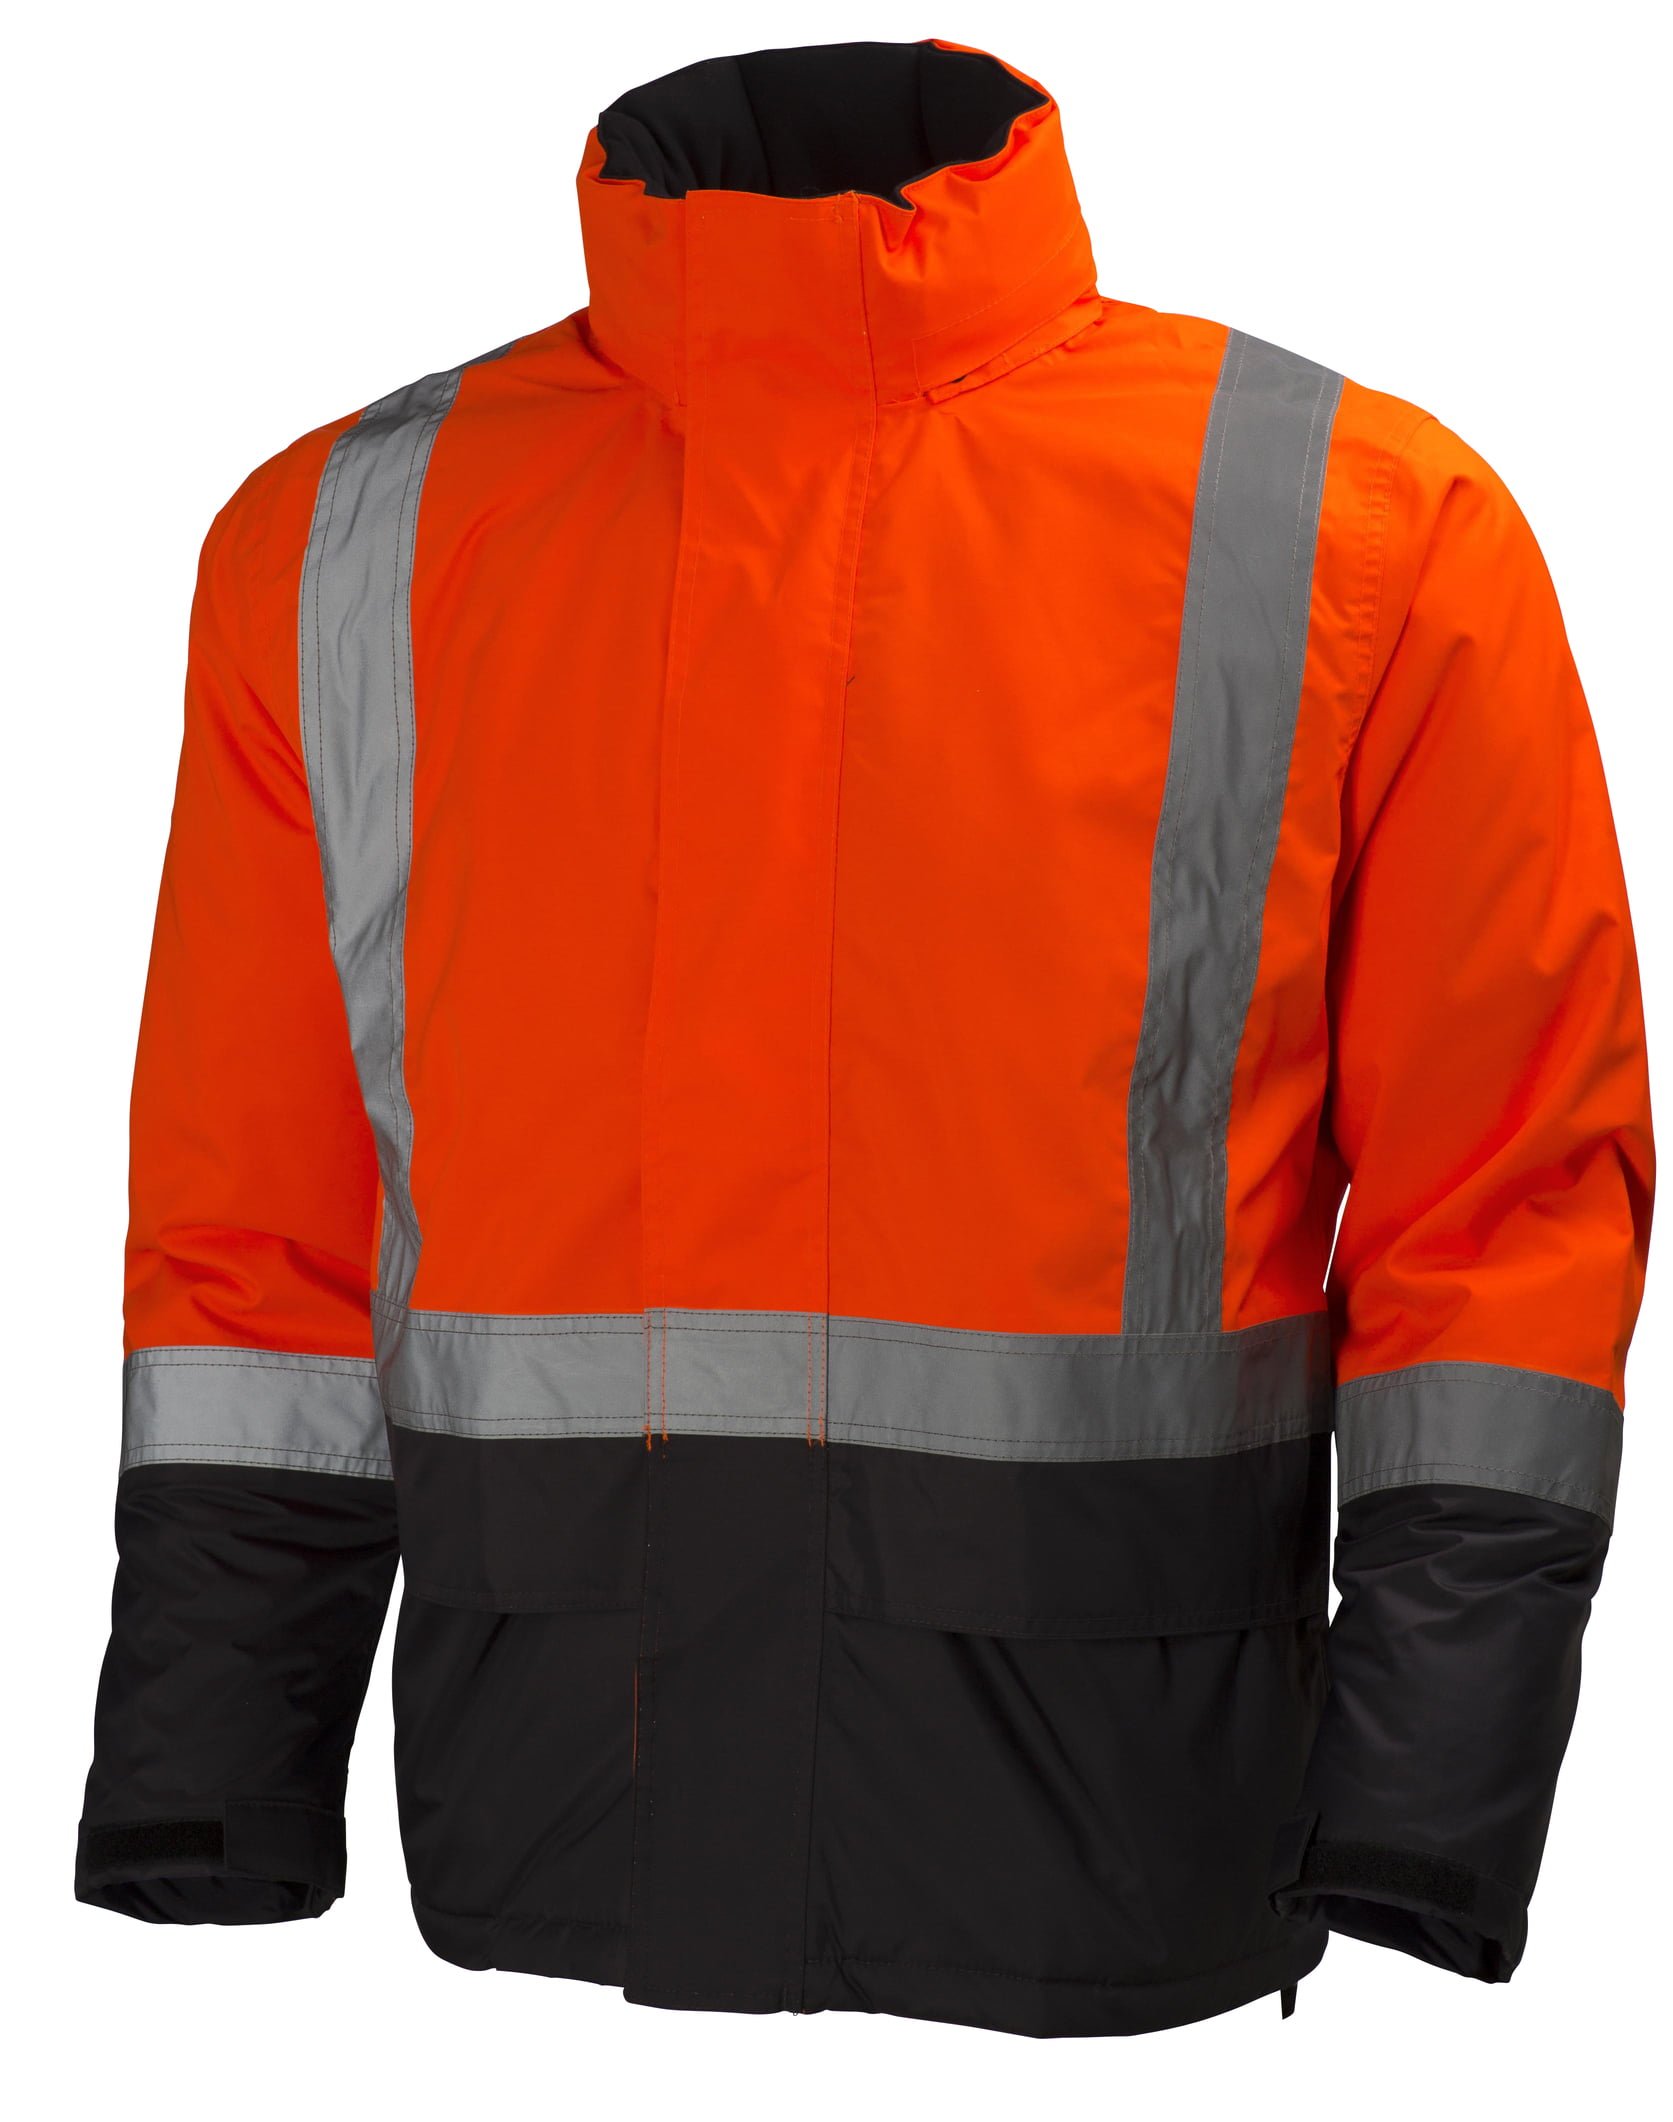 Helly Hansen Overall 70665 Alta Insulated Suit 269 HV Orange/Charcoal